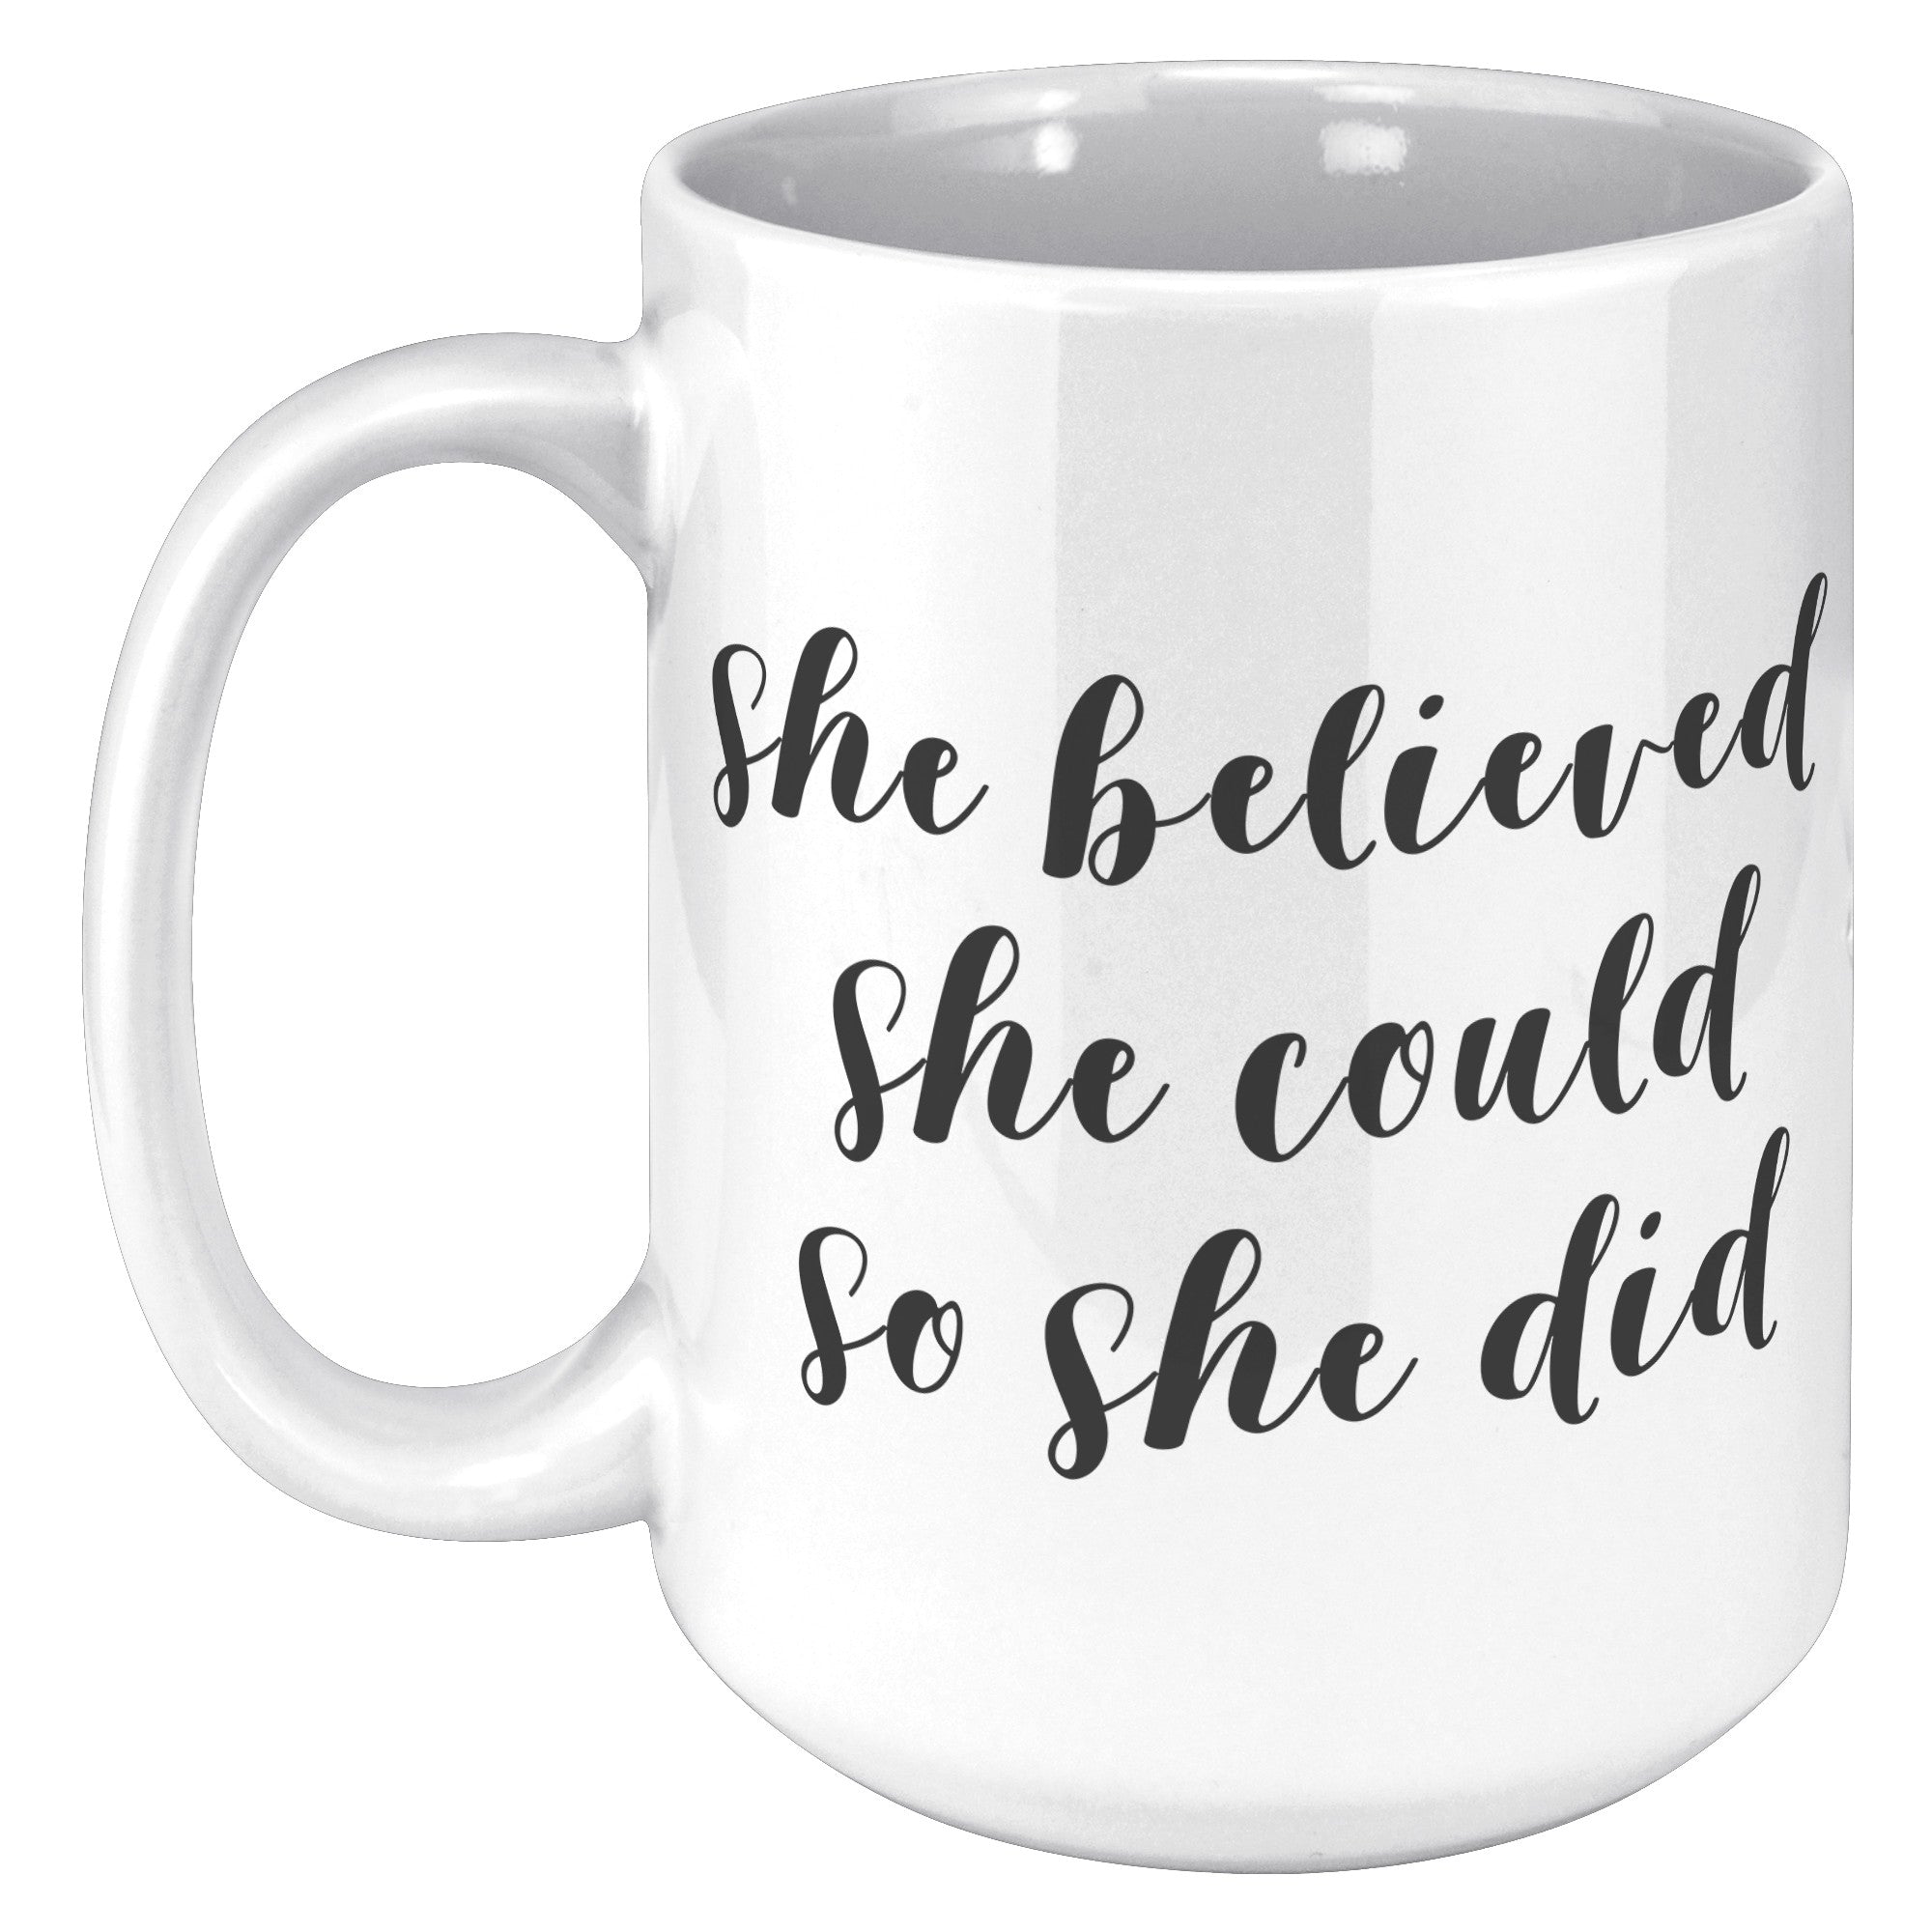 Female Runner Coffee Mug - Inspirational Running Quotes Cup - Perfect Gift for Women Runners - Motivational Marathoner's Morning Brew" - A1